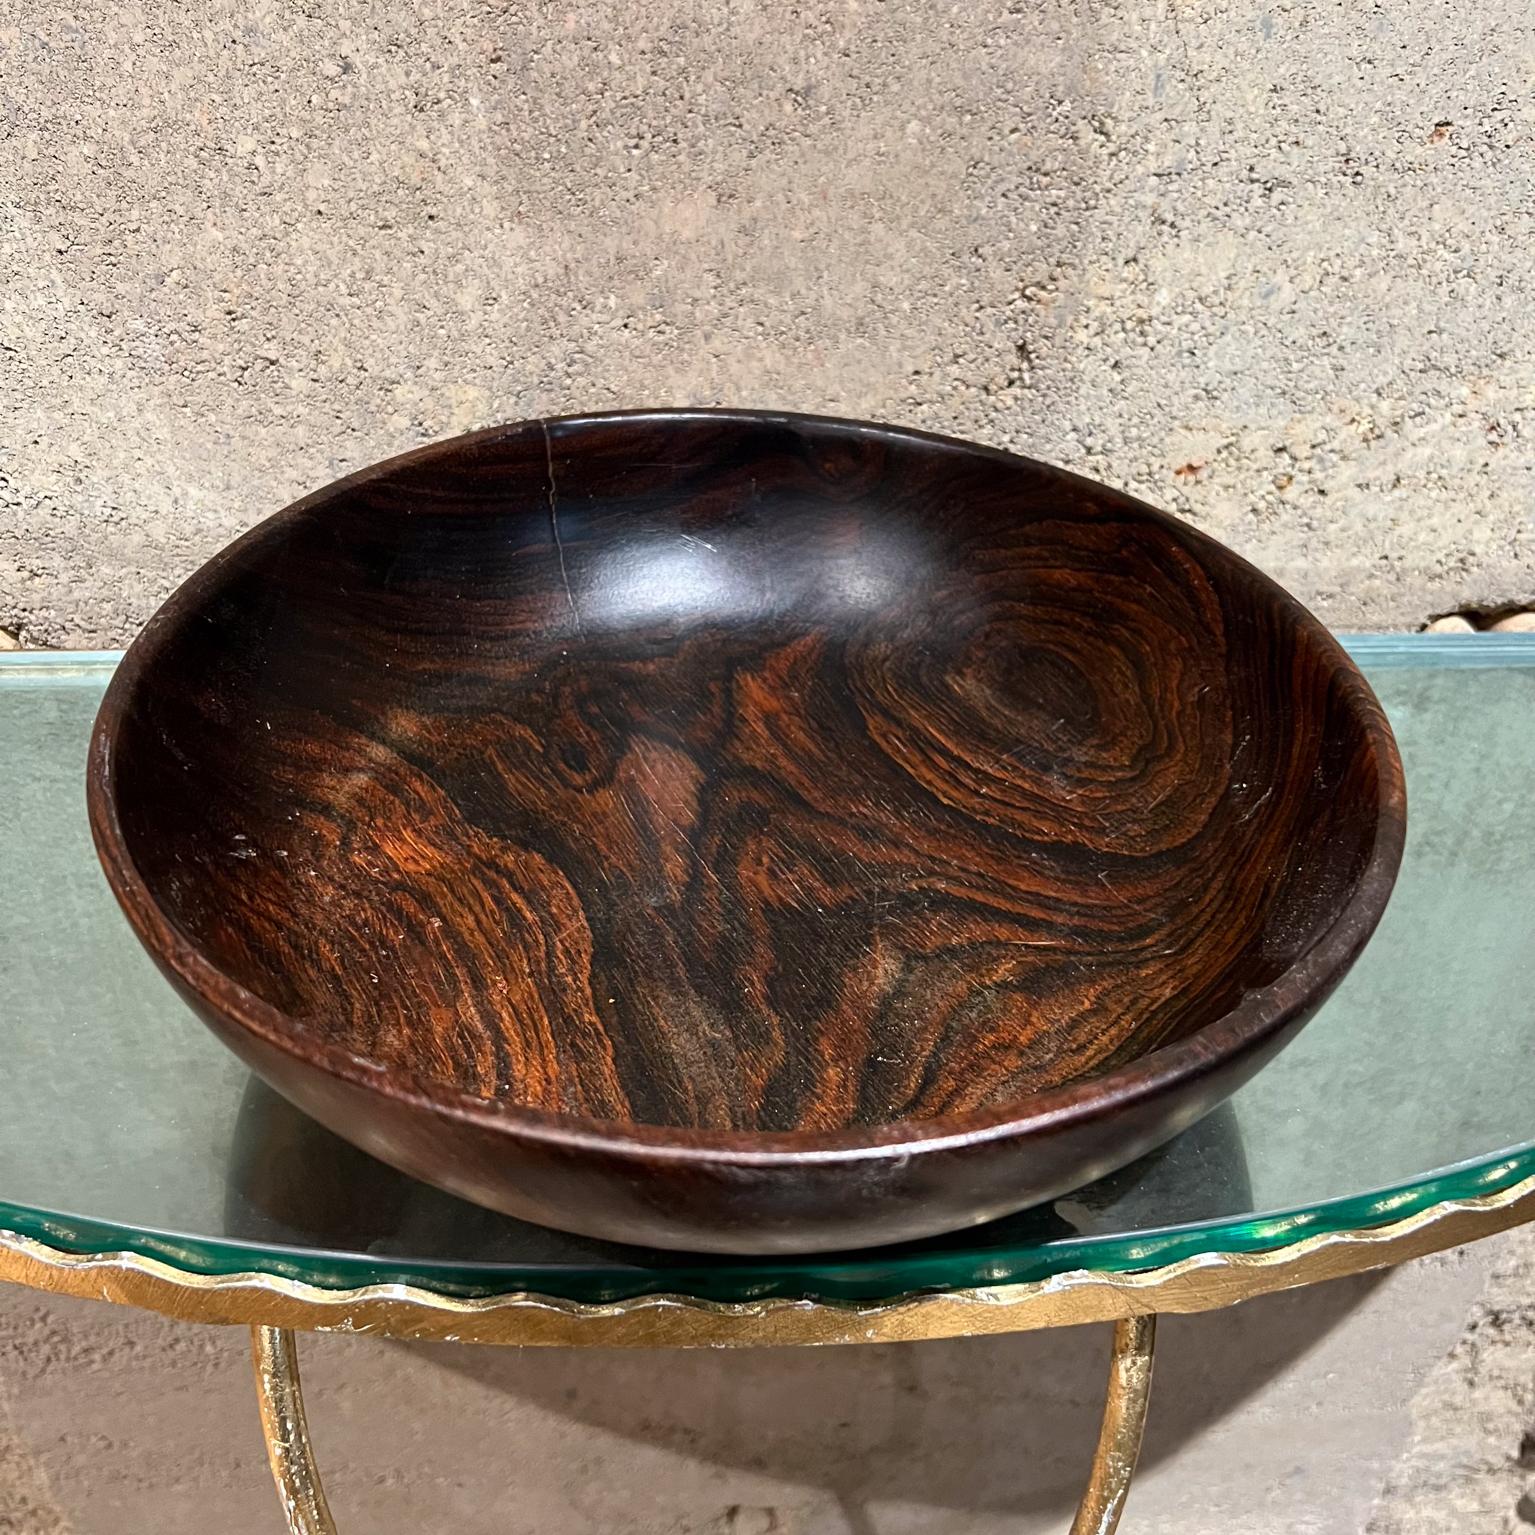 1960s Modern organic Rosewood Bowl 
Beautiful vintage organic lines
Hand turned wood
midcentury modern style of Rude Osolnik
Unsigned.
3 tall x 11.5 diameter
Preowned original vintage unrestored stable condition
note stress crack present.
Refer to